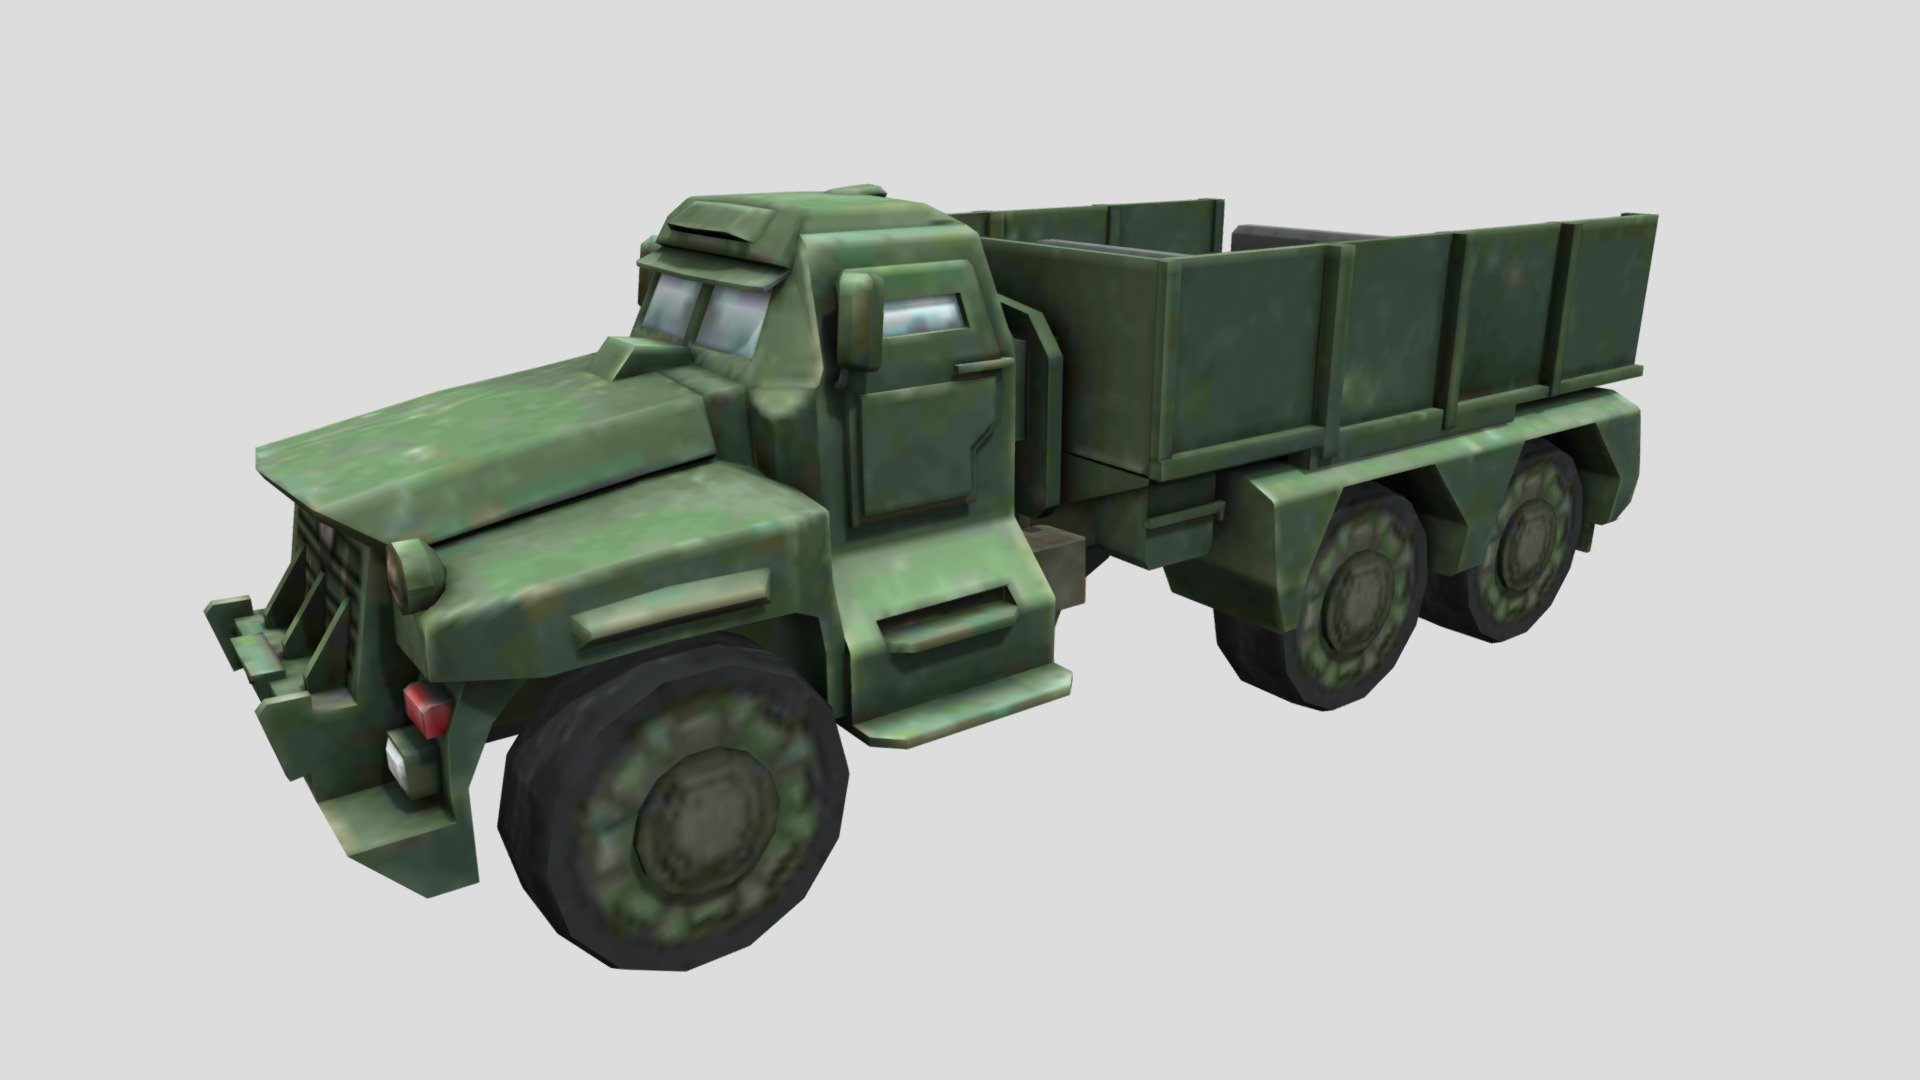 Military Truck Low Poly
The model has an optimized low poly mesh with the greatest possible number of simplifications that do not affect photo-realism but can help to simplify it, thus lightening your scene and allowing for using this model in real-time 3d applications.

Real-world accurate model.  In this product, all objects are ERROR-FREE and All LEGAL Geometry. Subdivisions are not required for this product.

Perfect for Architectural, Product visualization, Game Engine, and VR (Virtual Reality) No Plugin Needed.

Format Type




3ds Max 2017 (standard shader)

FBX

OBJ

3DS

Texture

1 material used. 1 Texture:




Diffuse

You might need to re-assign textures map to model in your relevant software - Military Truck Low Poly - Buy Royalty Free 3D model by luxe3dworld 3d model